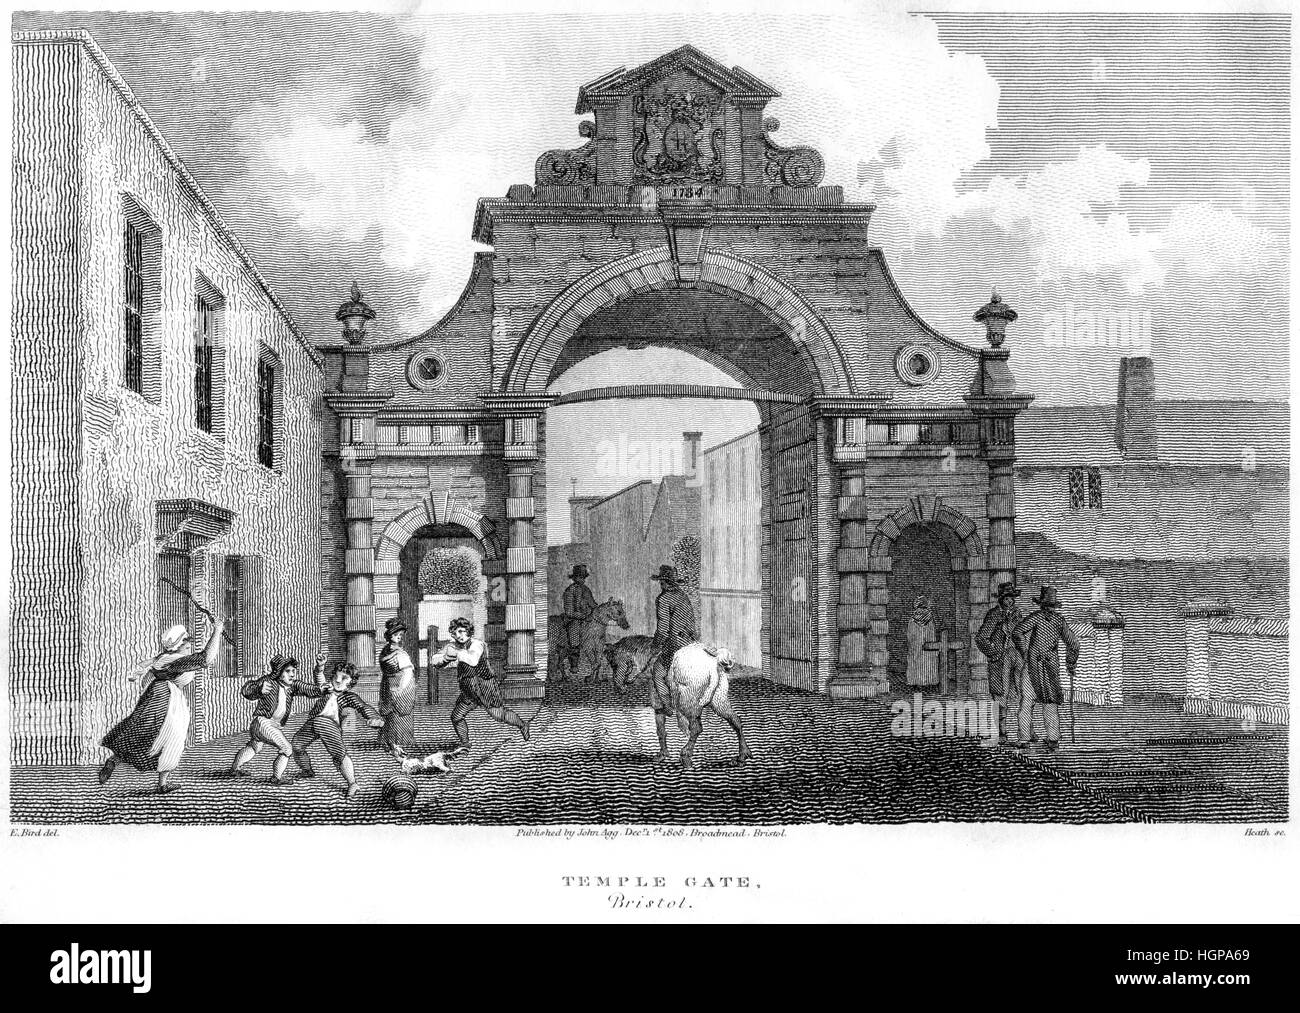 An engraving of Temple Gate, Bristol in 1808 scanned at high resolution from a book printed in 1816. Believed copyright free. Stock Photo